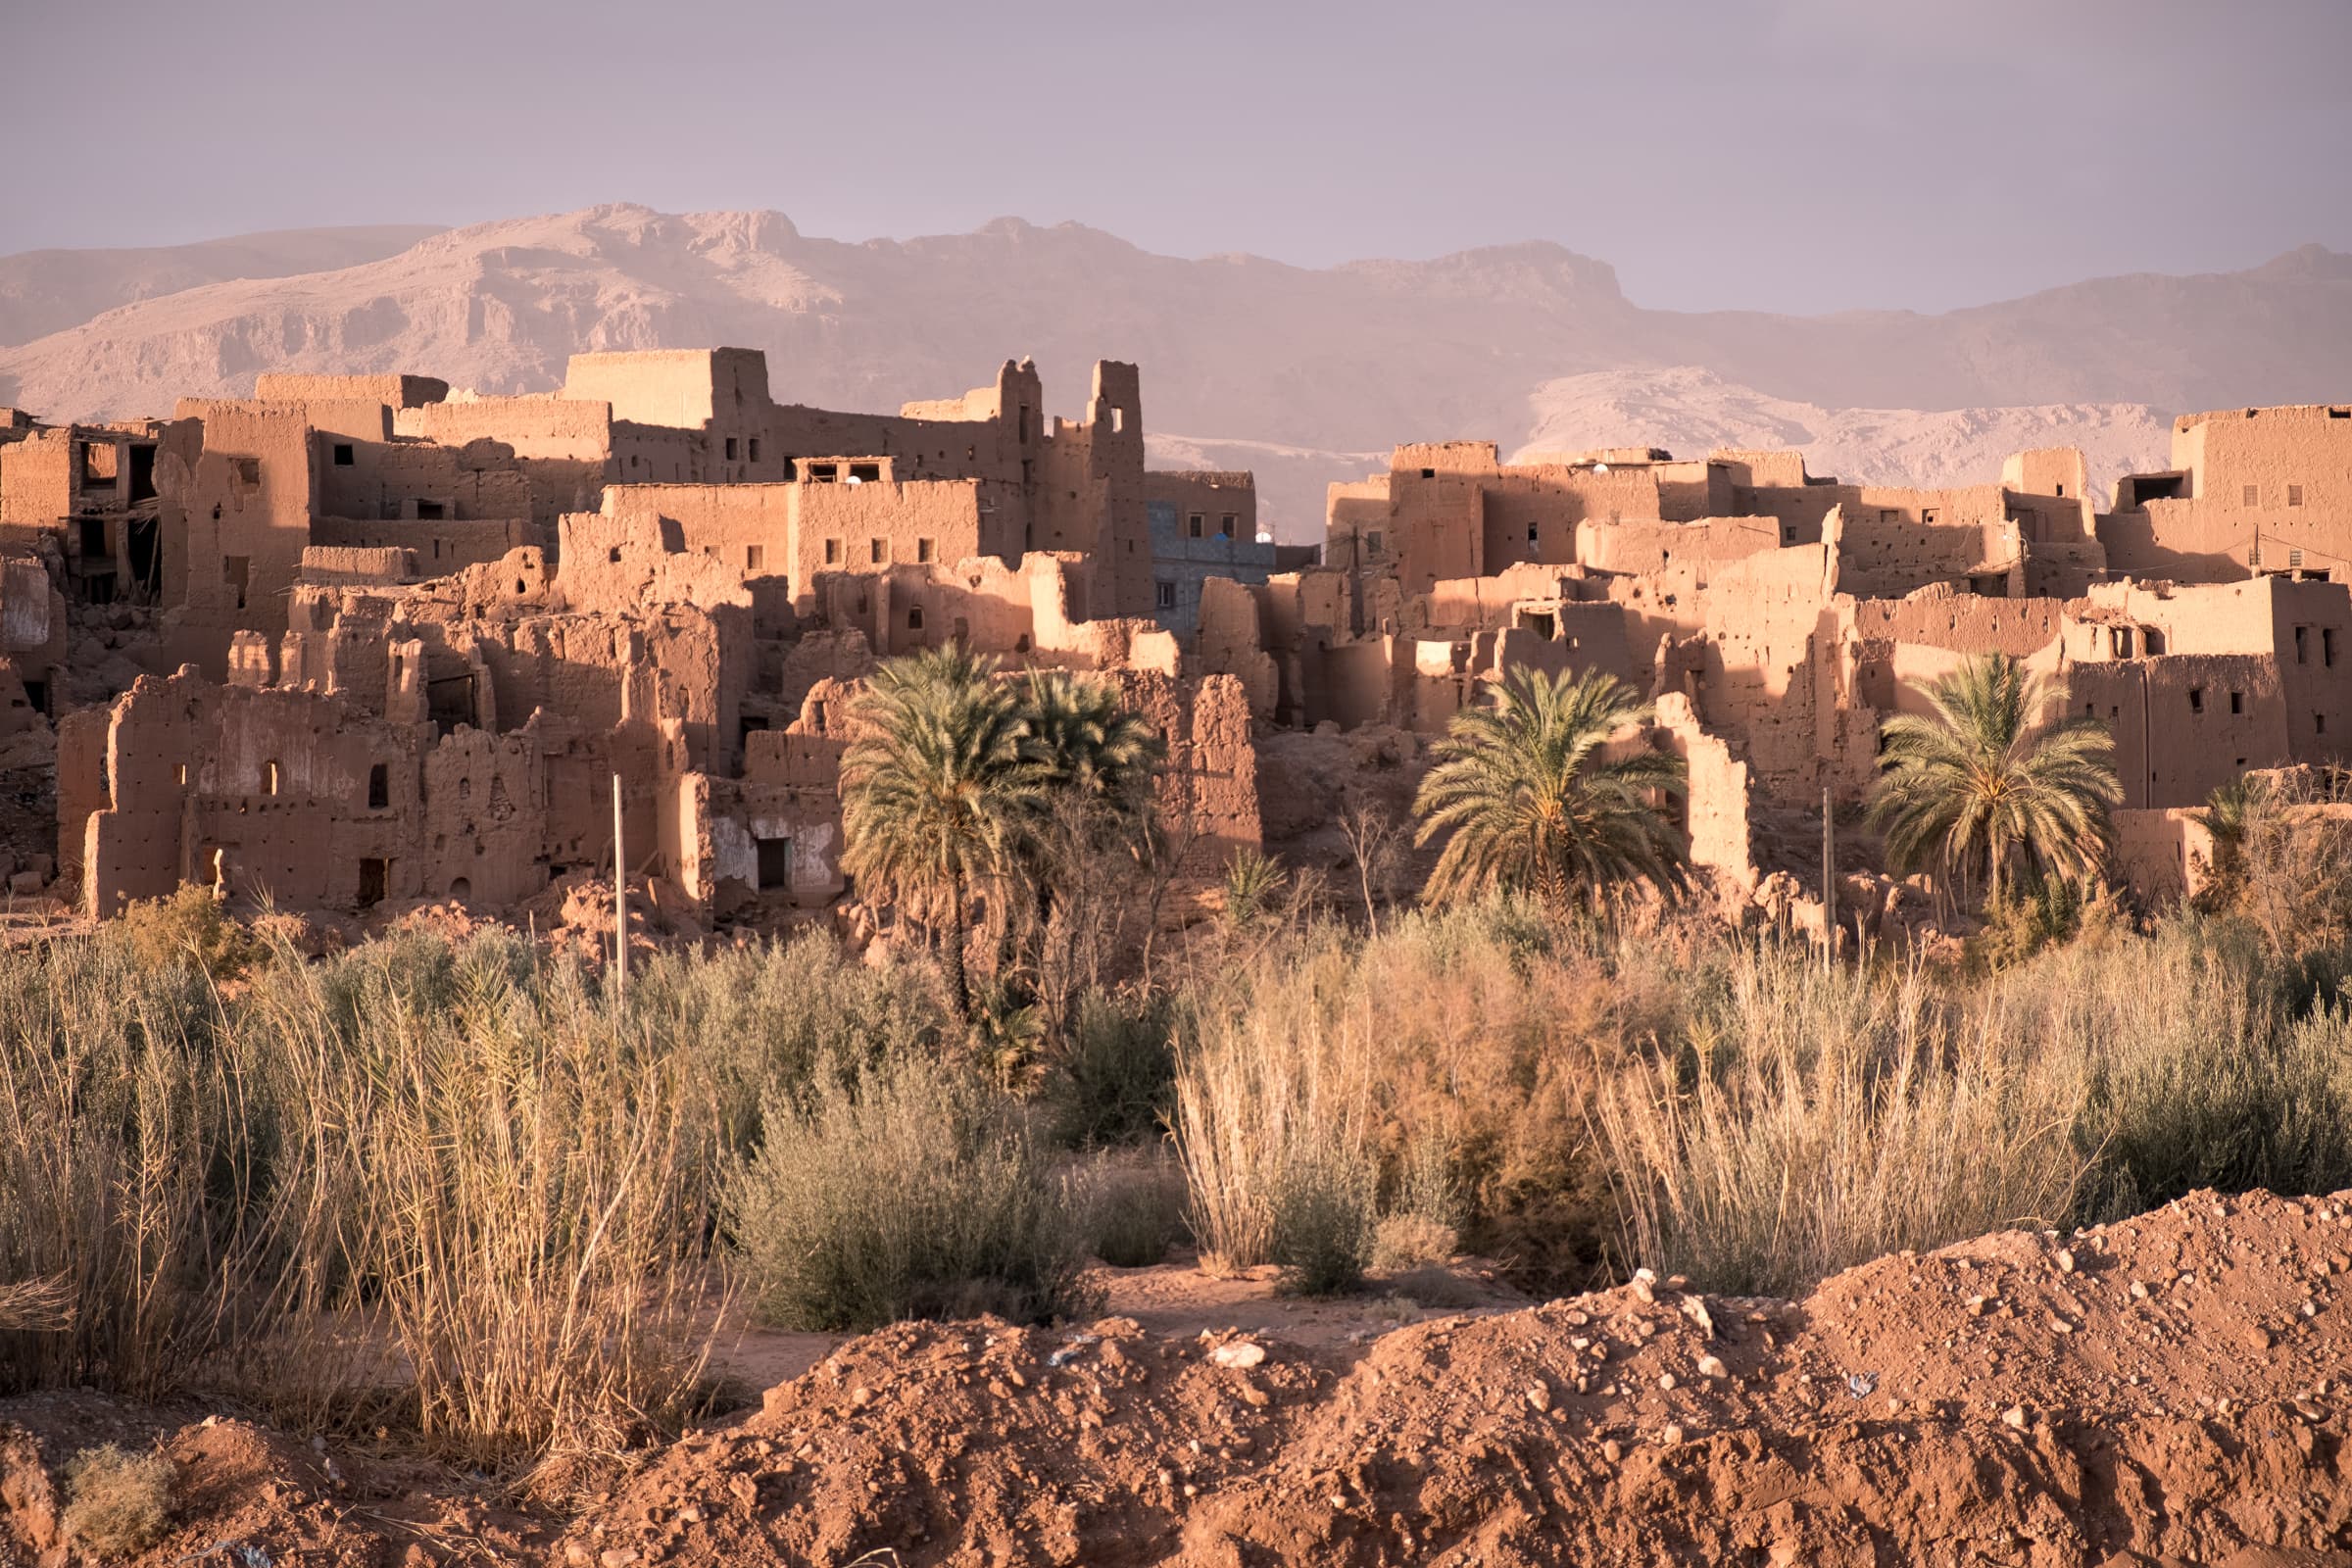 A wider shot of an abandoned Kasbah in Tinghir